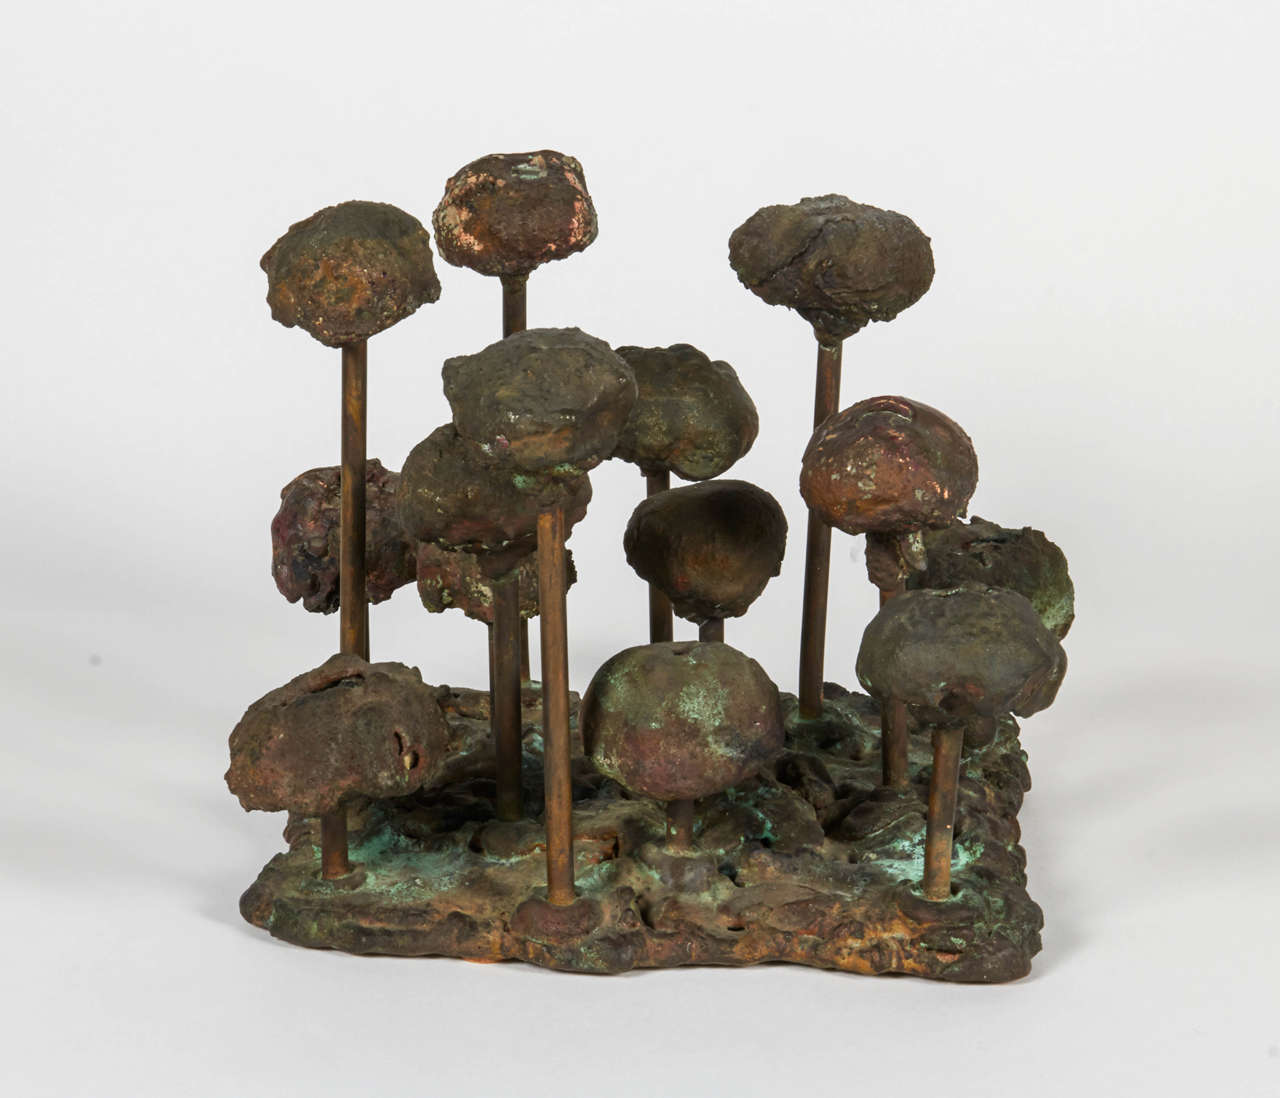 Bertoia's pressure melting or forging, technique had its roots in his earlier work in jewelry. Bertoia subjected the metal to heat and the hammer to mold it into the shapes he desired.